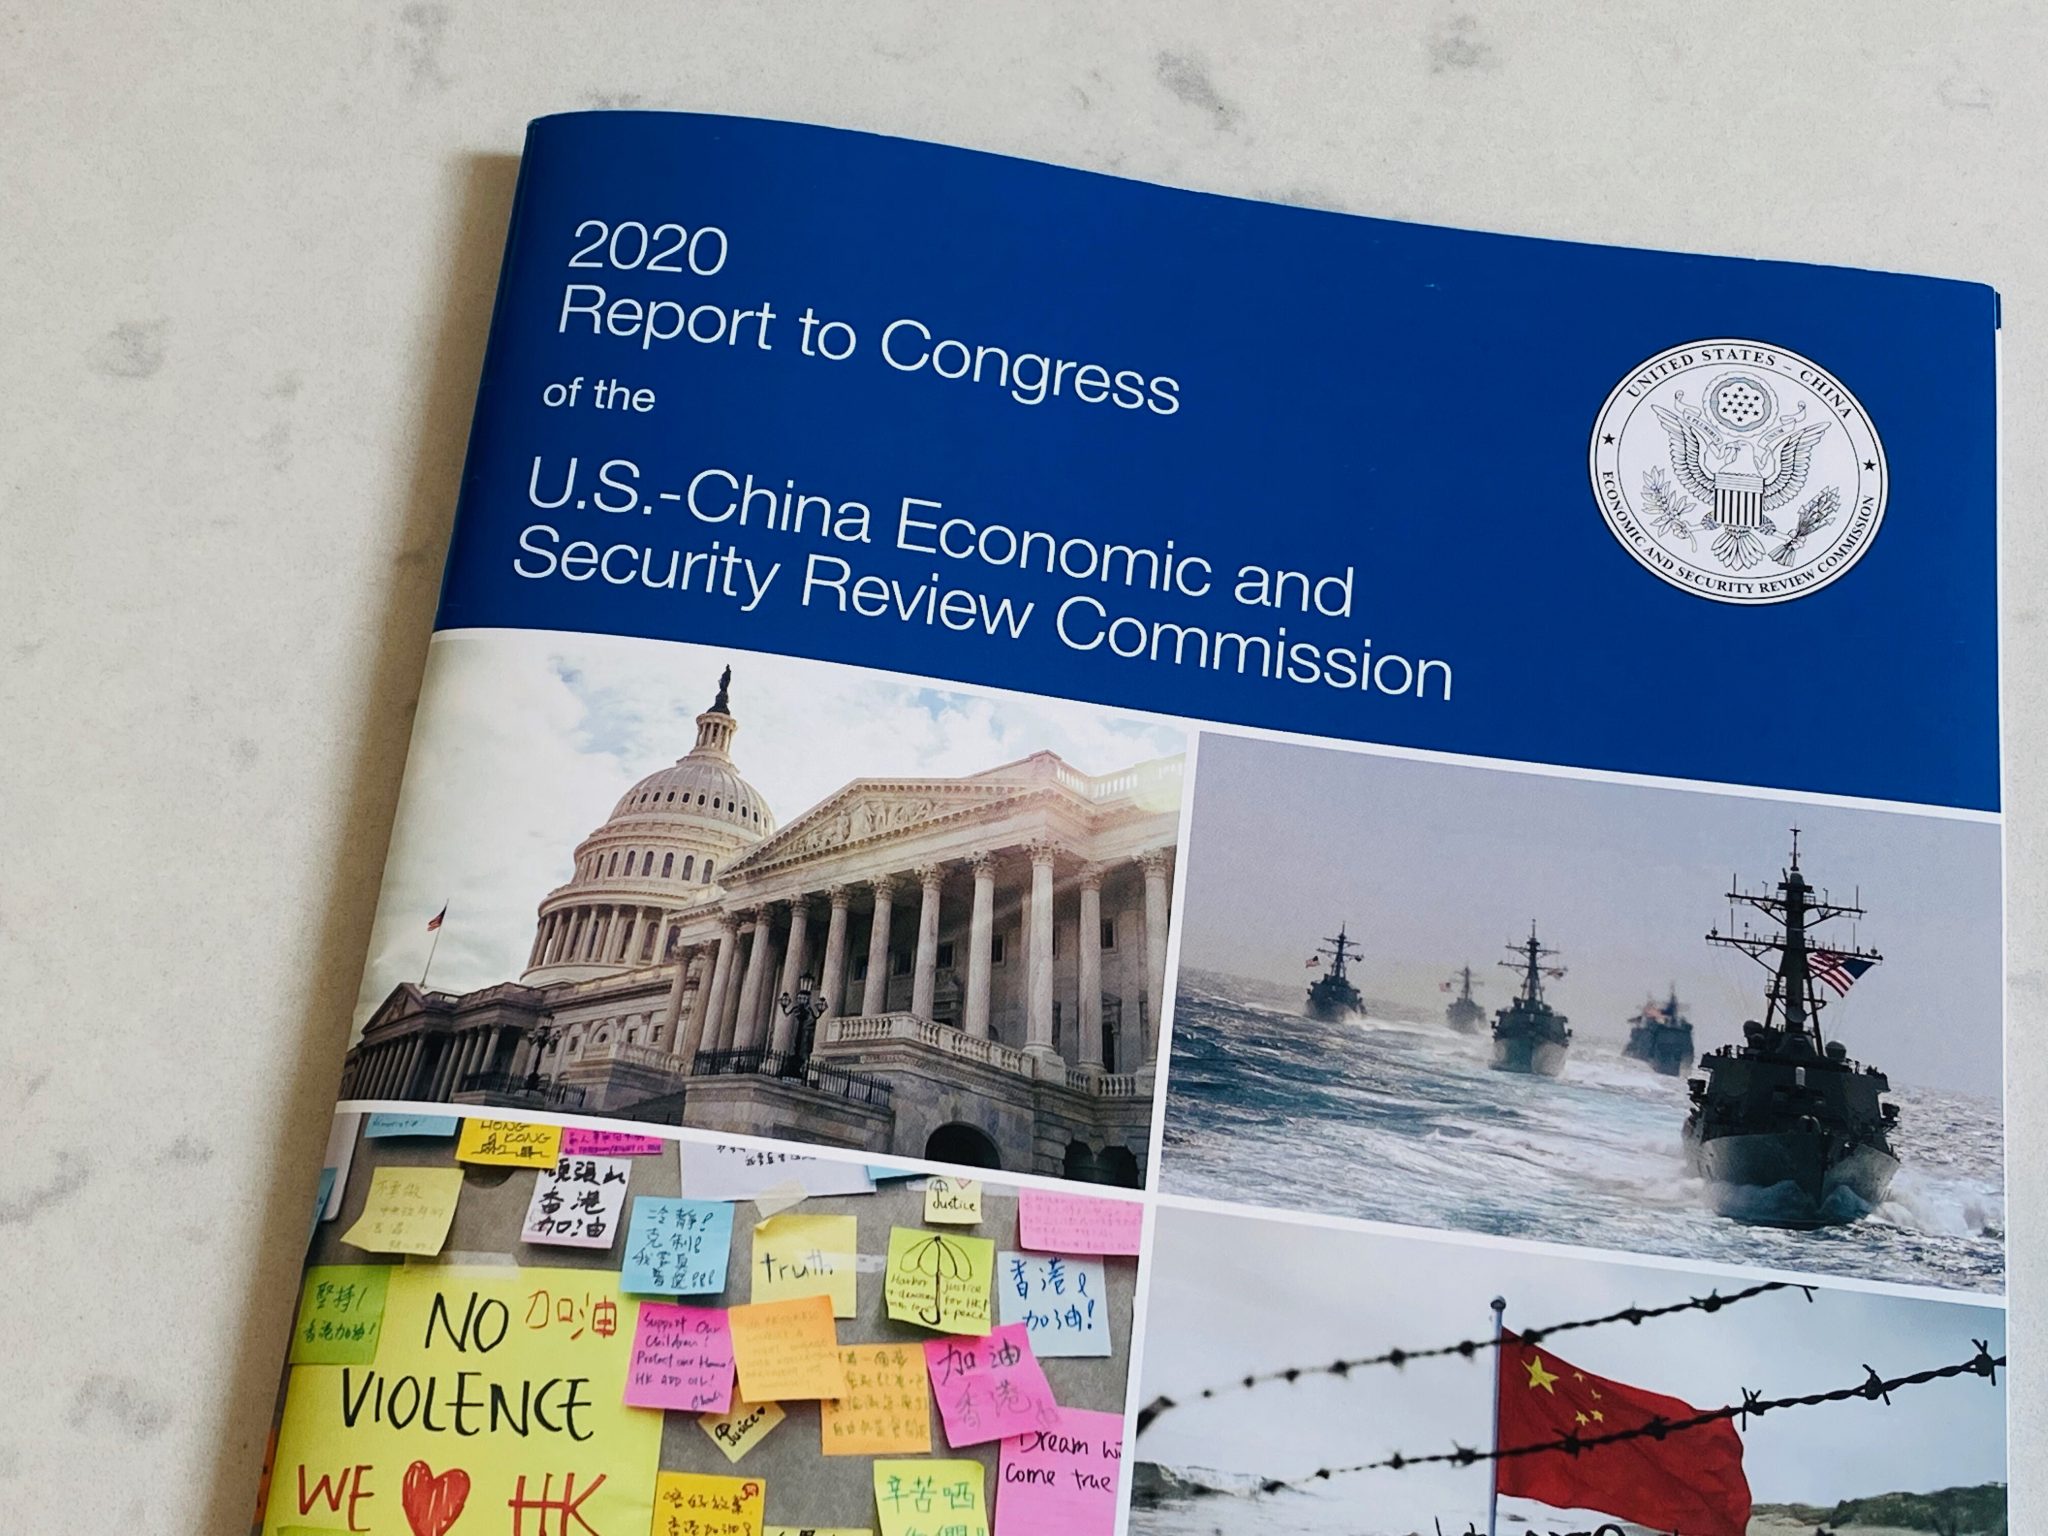 “Executive Summary and Recommendations” of the U.S.-China Economic and Security Review Commission 2020 Annual Report to Congress